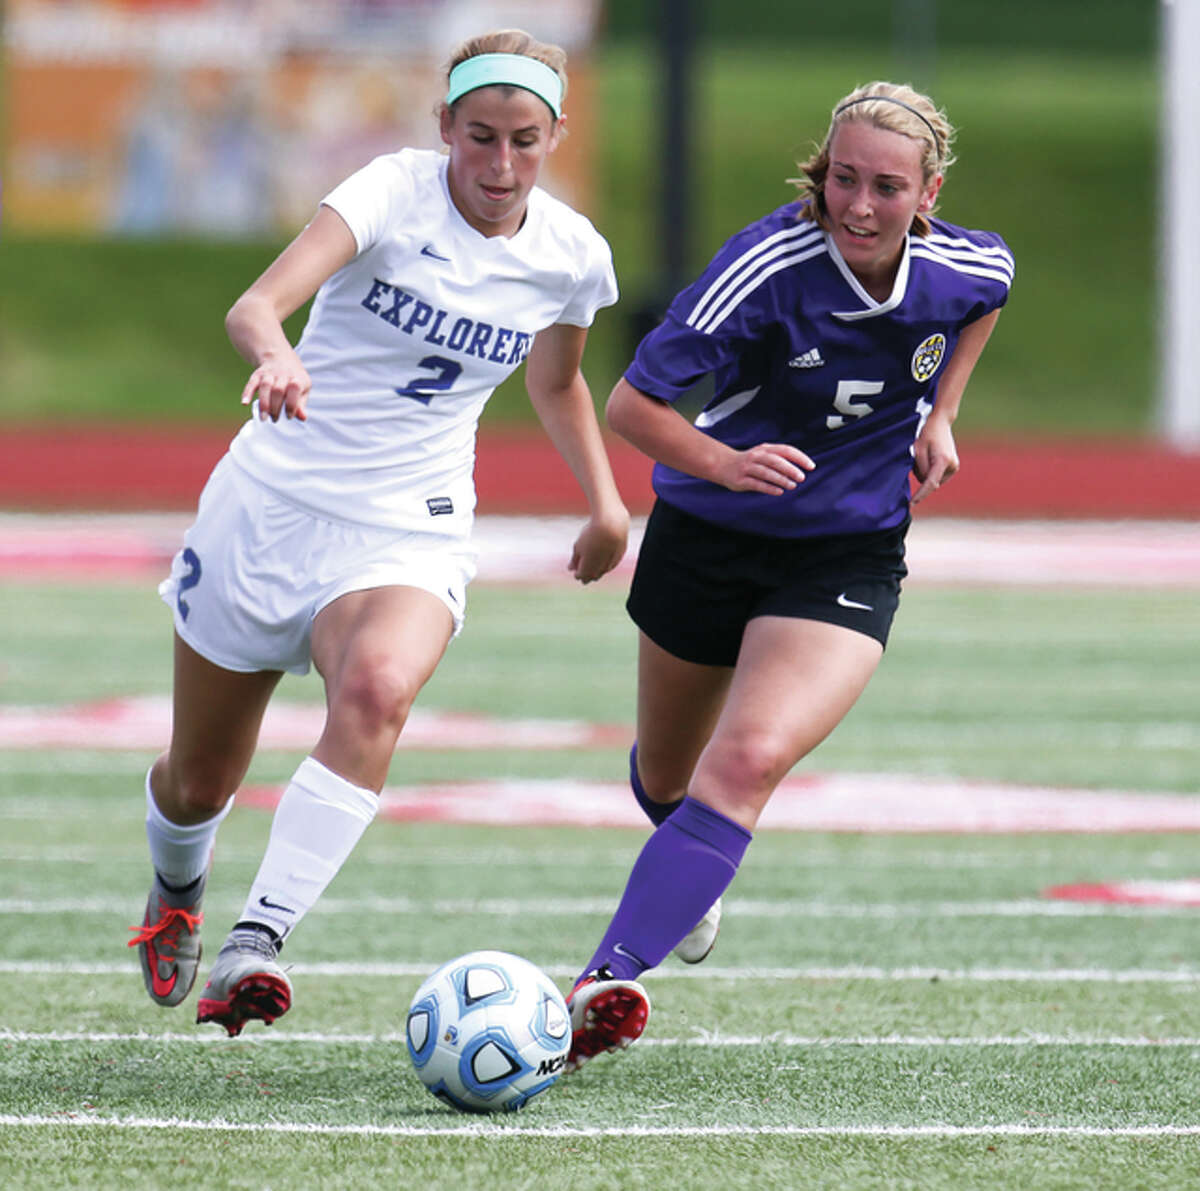 Marquette Catholic’s Annabelle Copeland (left) moves the ball up the pitch against Williamsville’s Annie Gantt during the Class 1A state girls soccer third-place game Saturday at North Central College in Naperville.